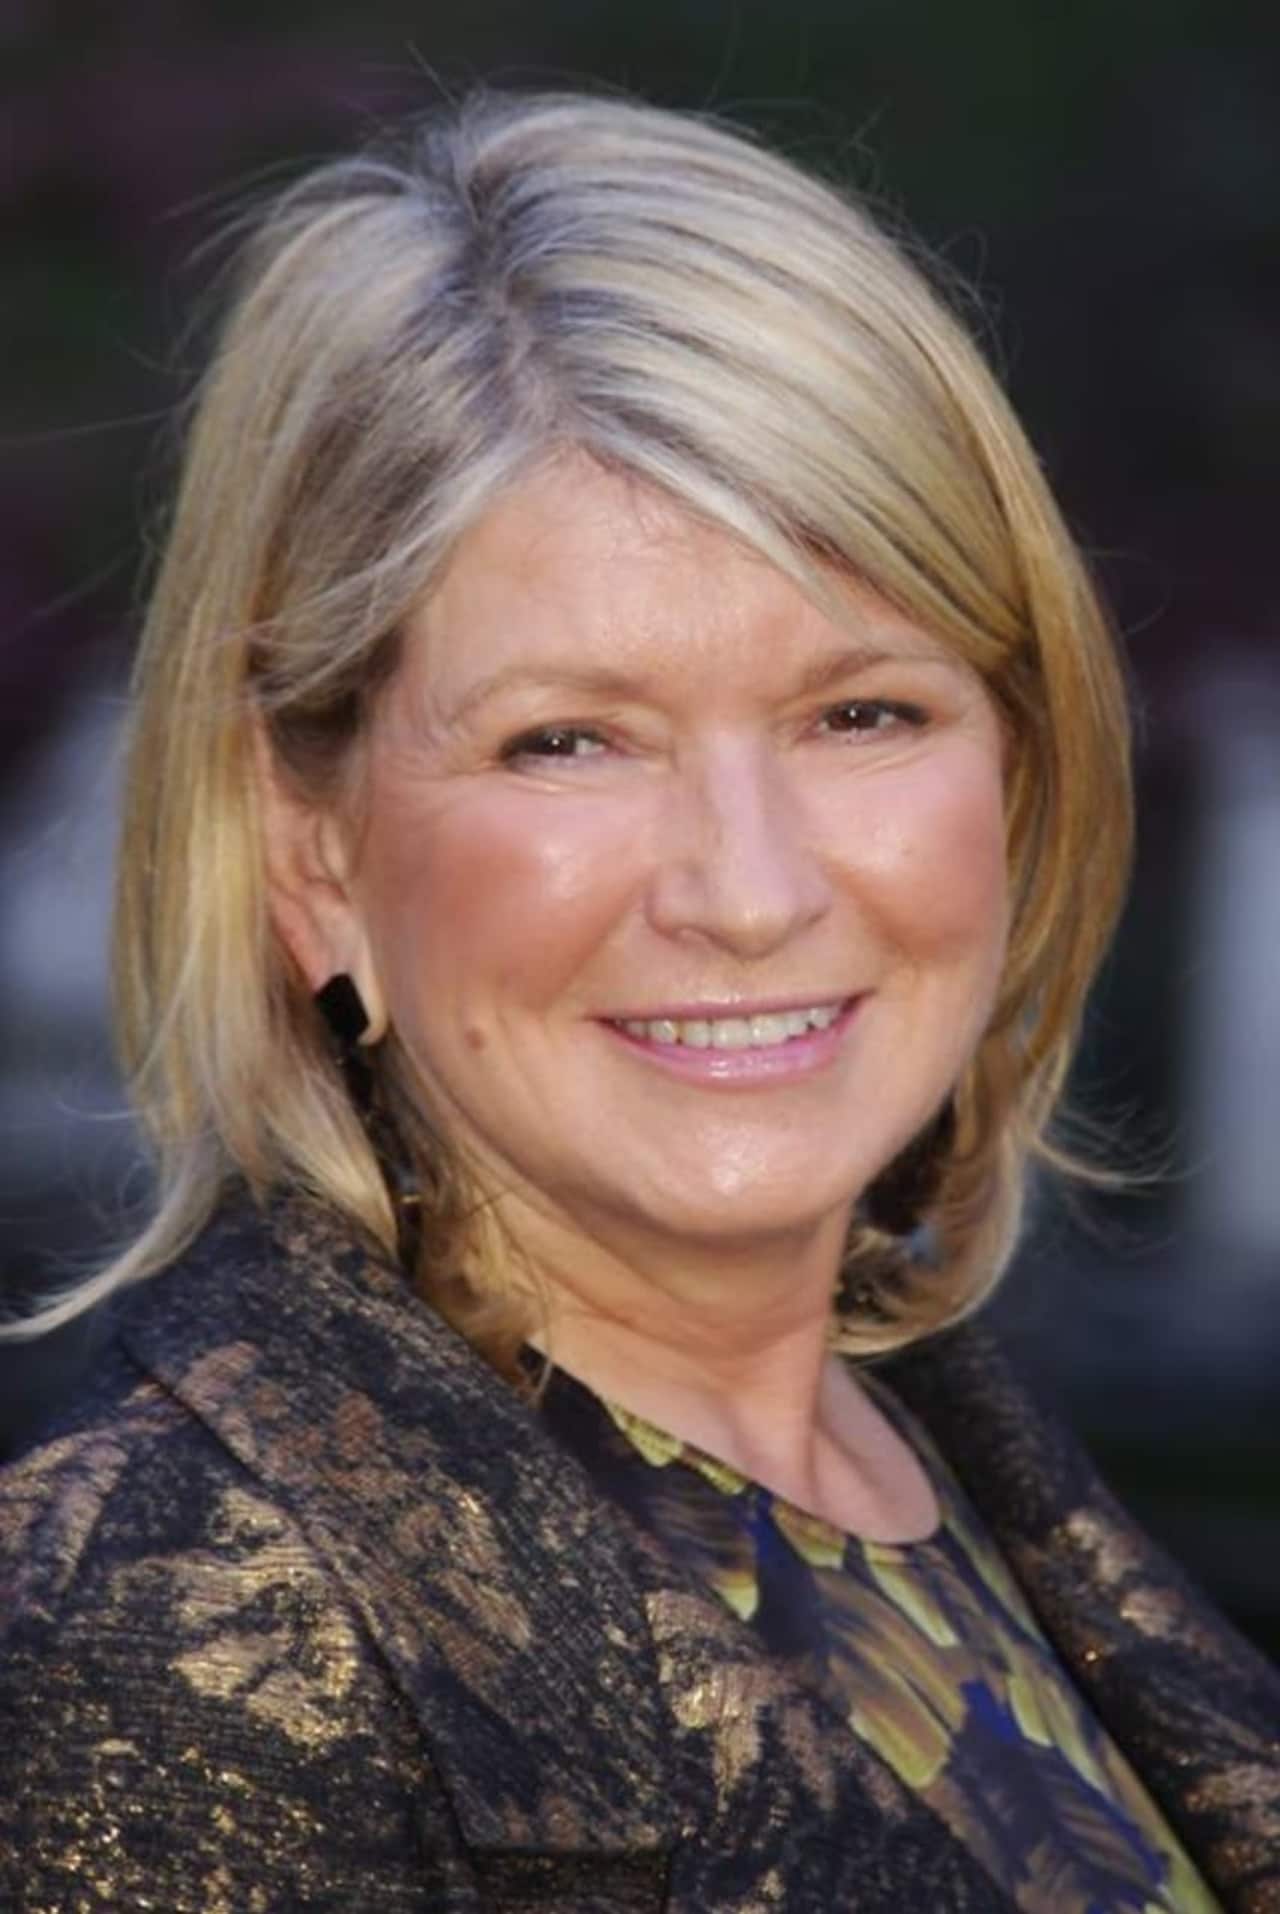 Martha Stewart was recently spotted at Dr. Mike's in Bethel.